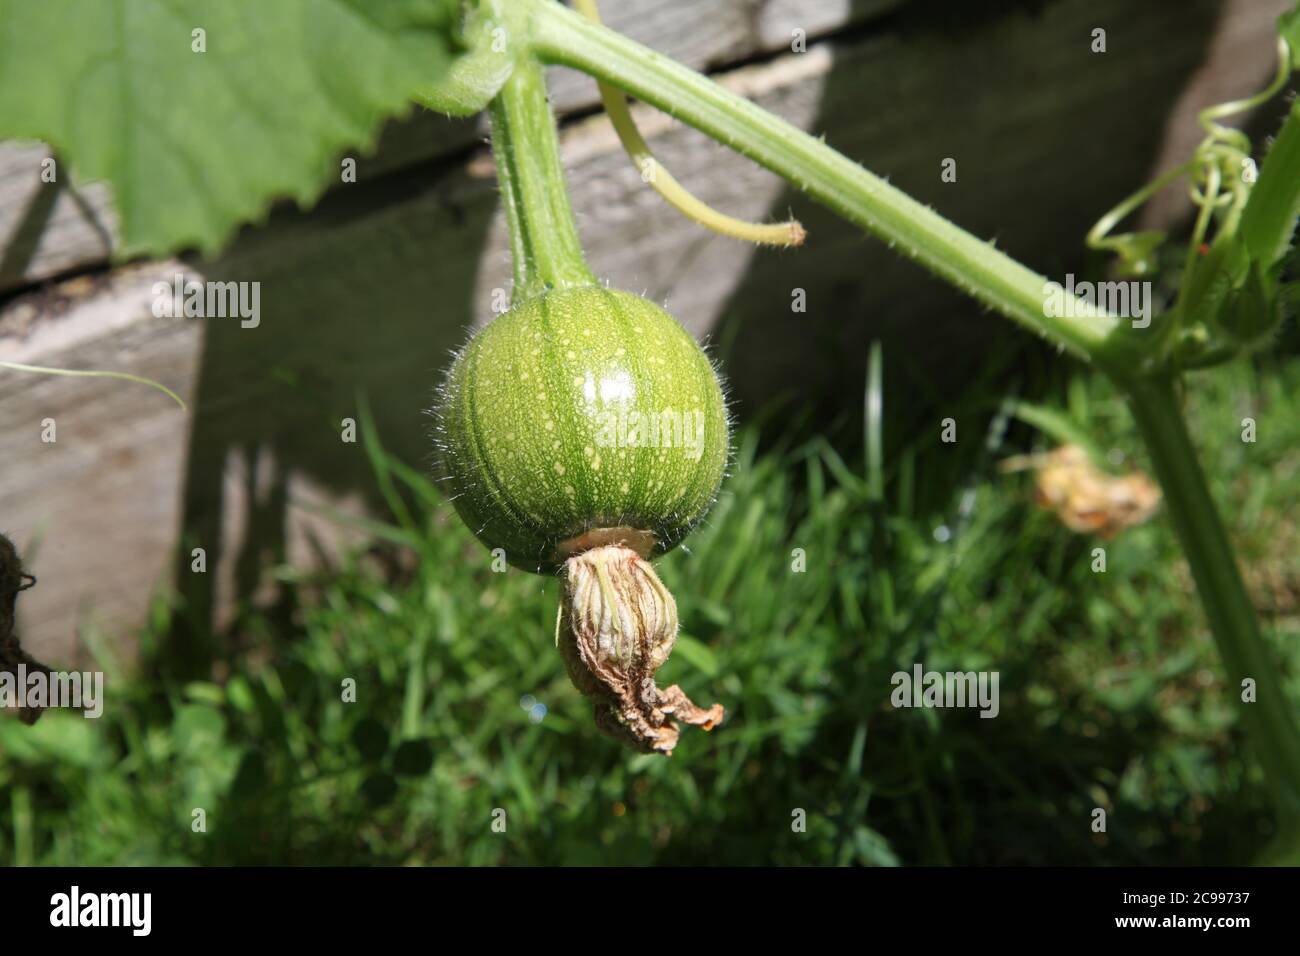 Squash Vine High Resolution Stock Photography And Images Alamy,How To Defrost A Turkey Fast